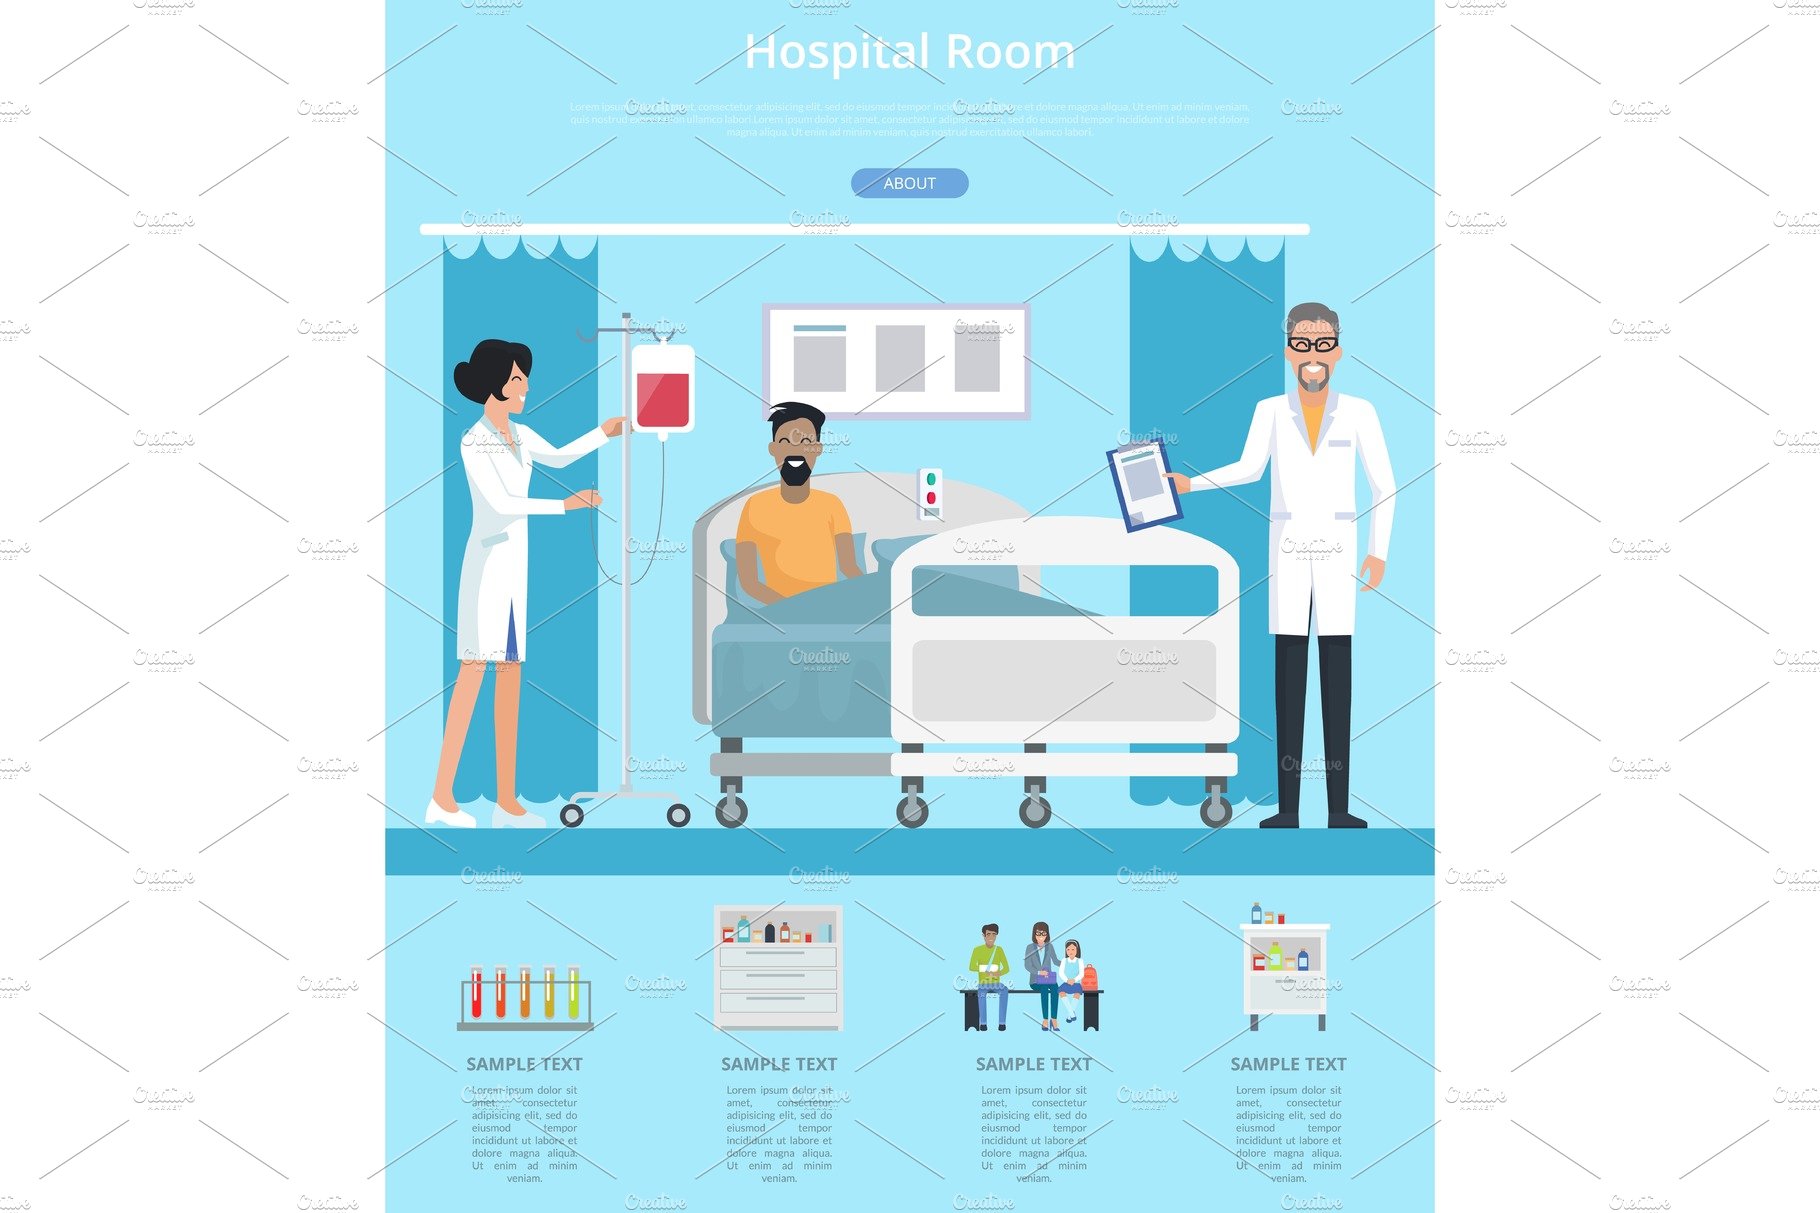 Hospital Room Services Vector Illustration cover image.